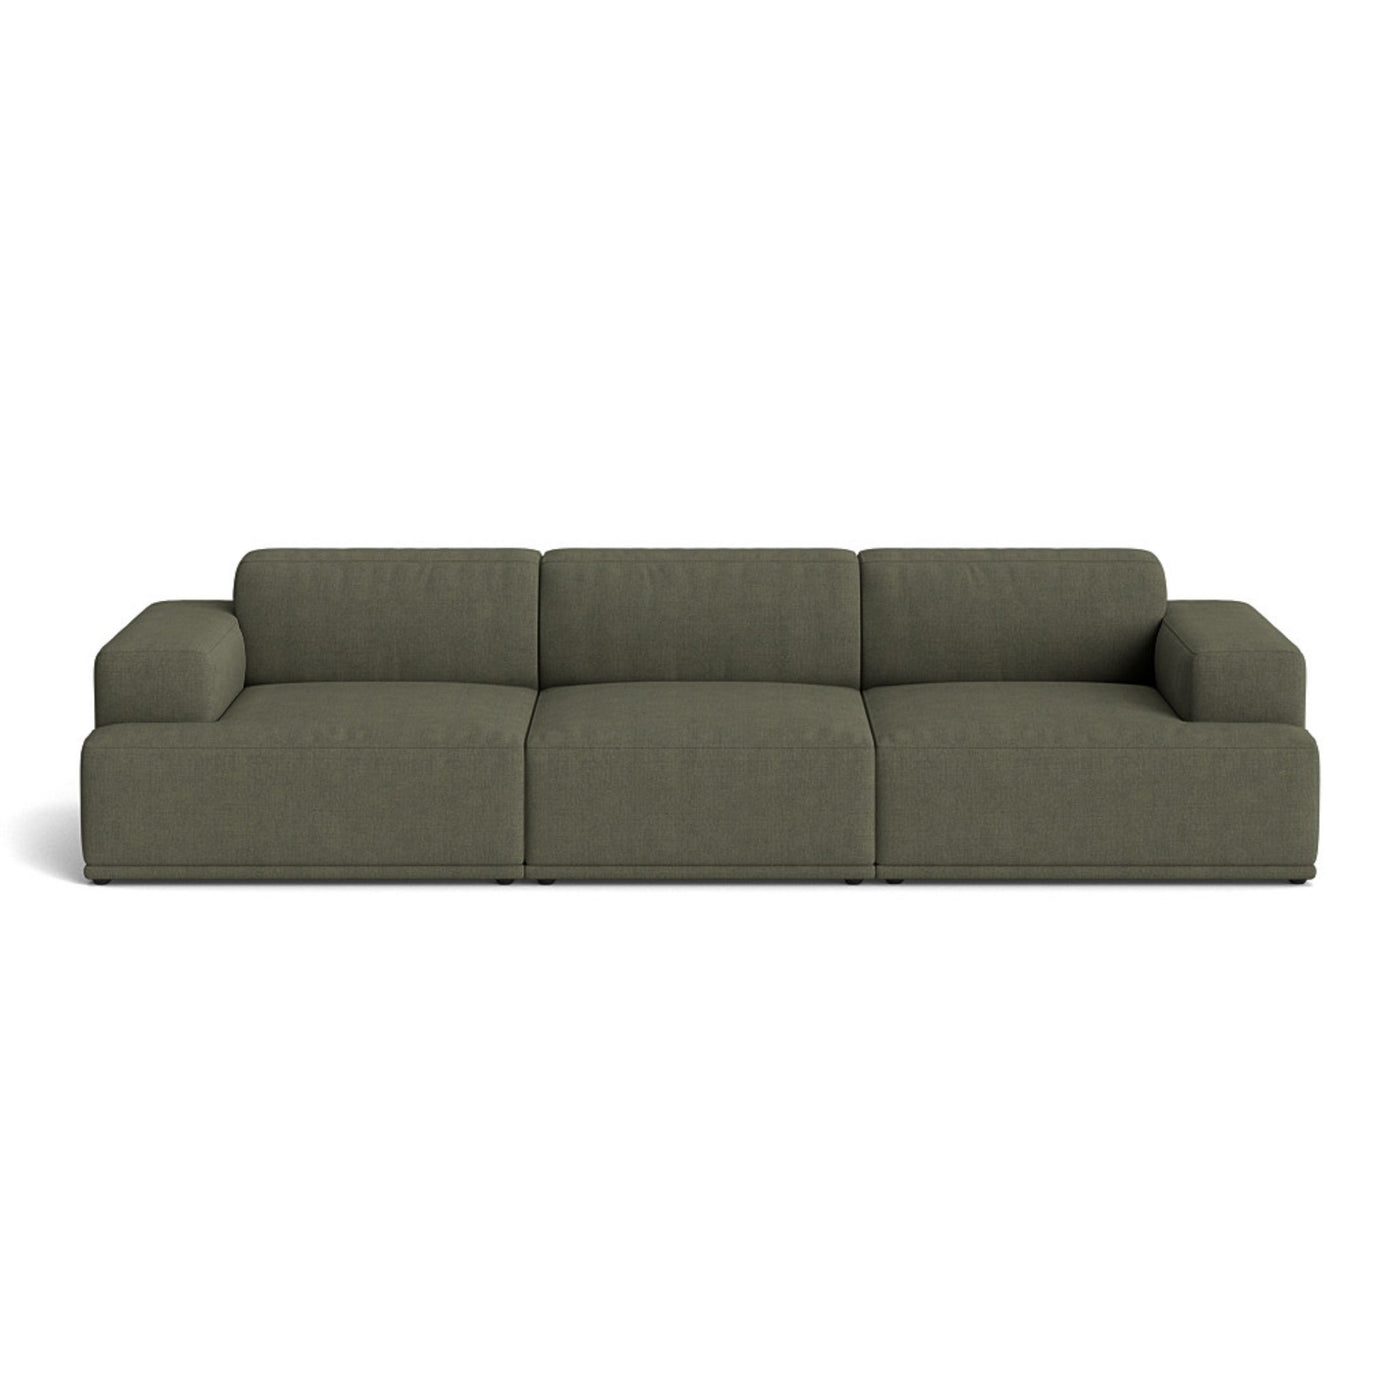 Muuto Connect Soft Modular 3 Seater Sofa, configuration 1. Made-to-order from someday designs. #colour_fiord-961